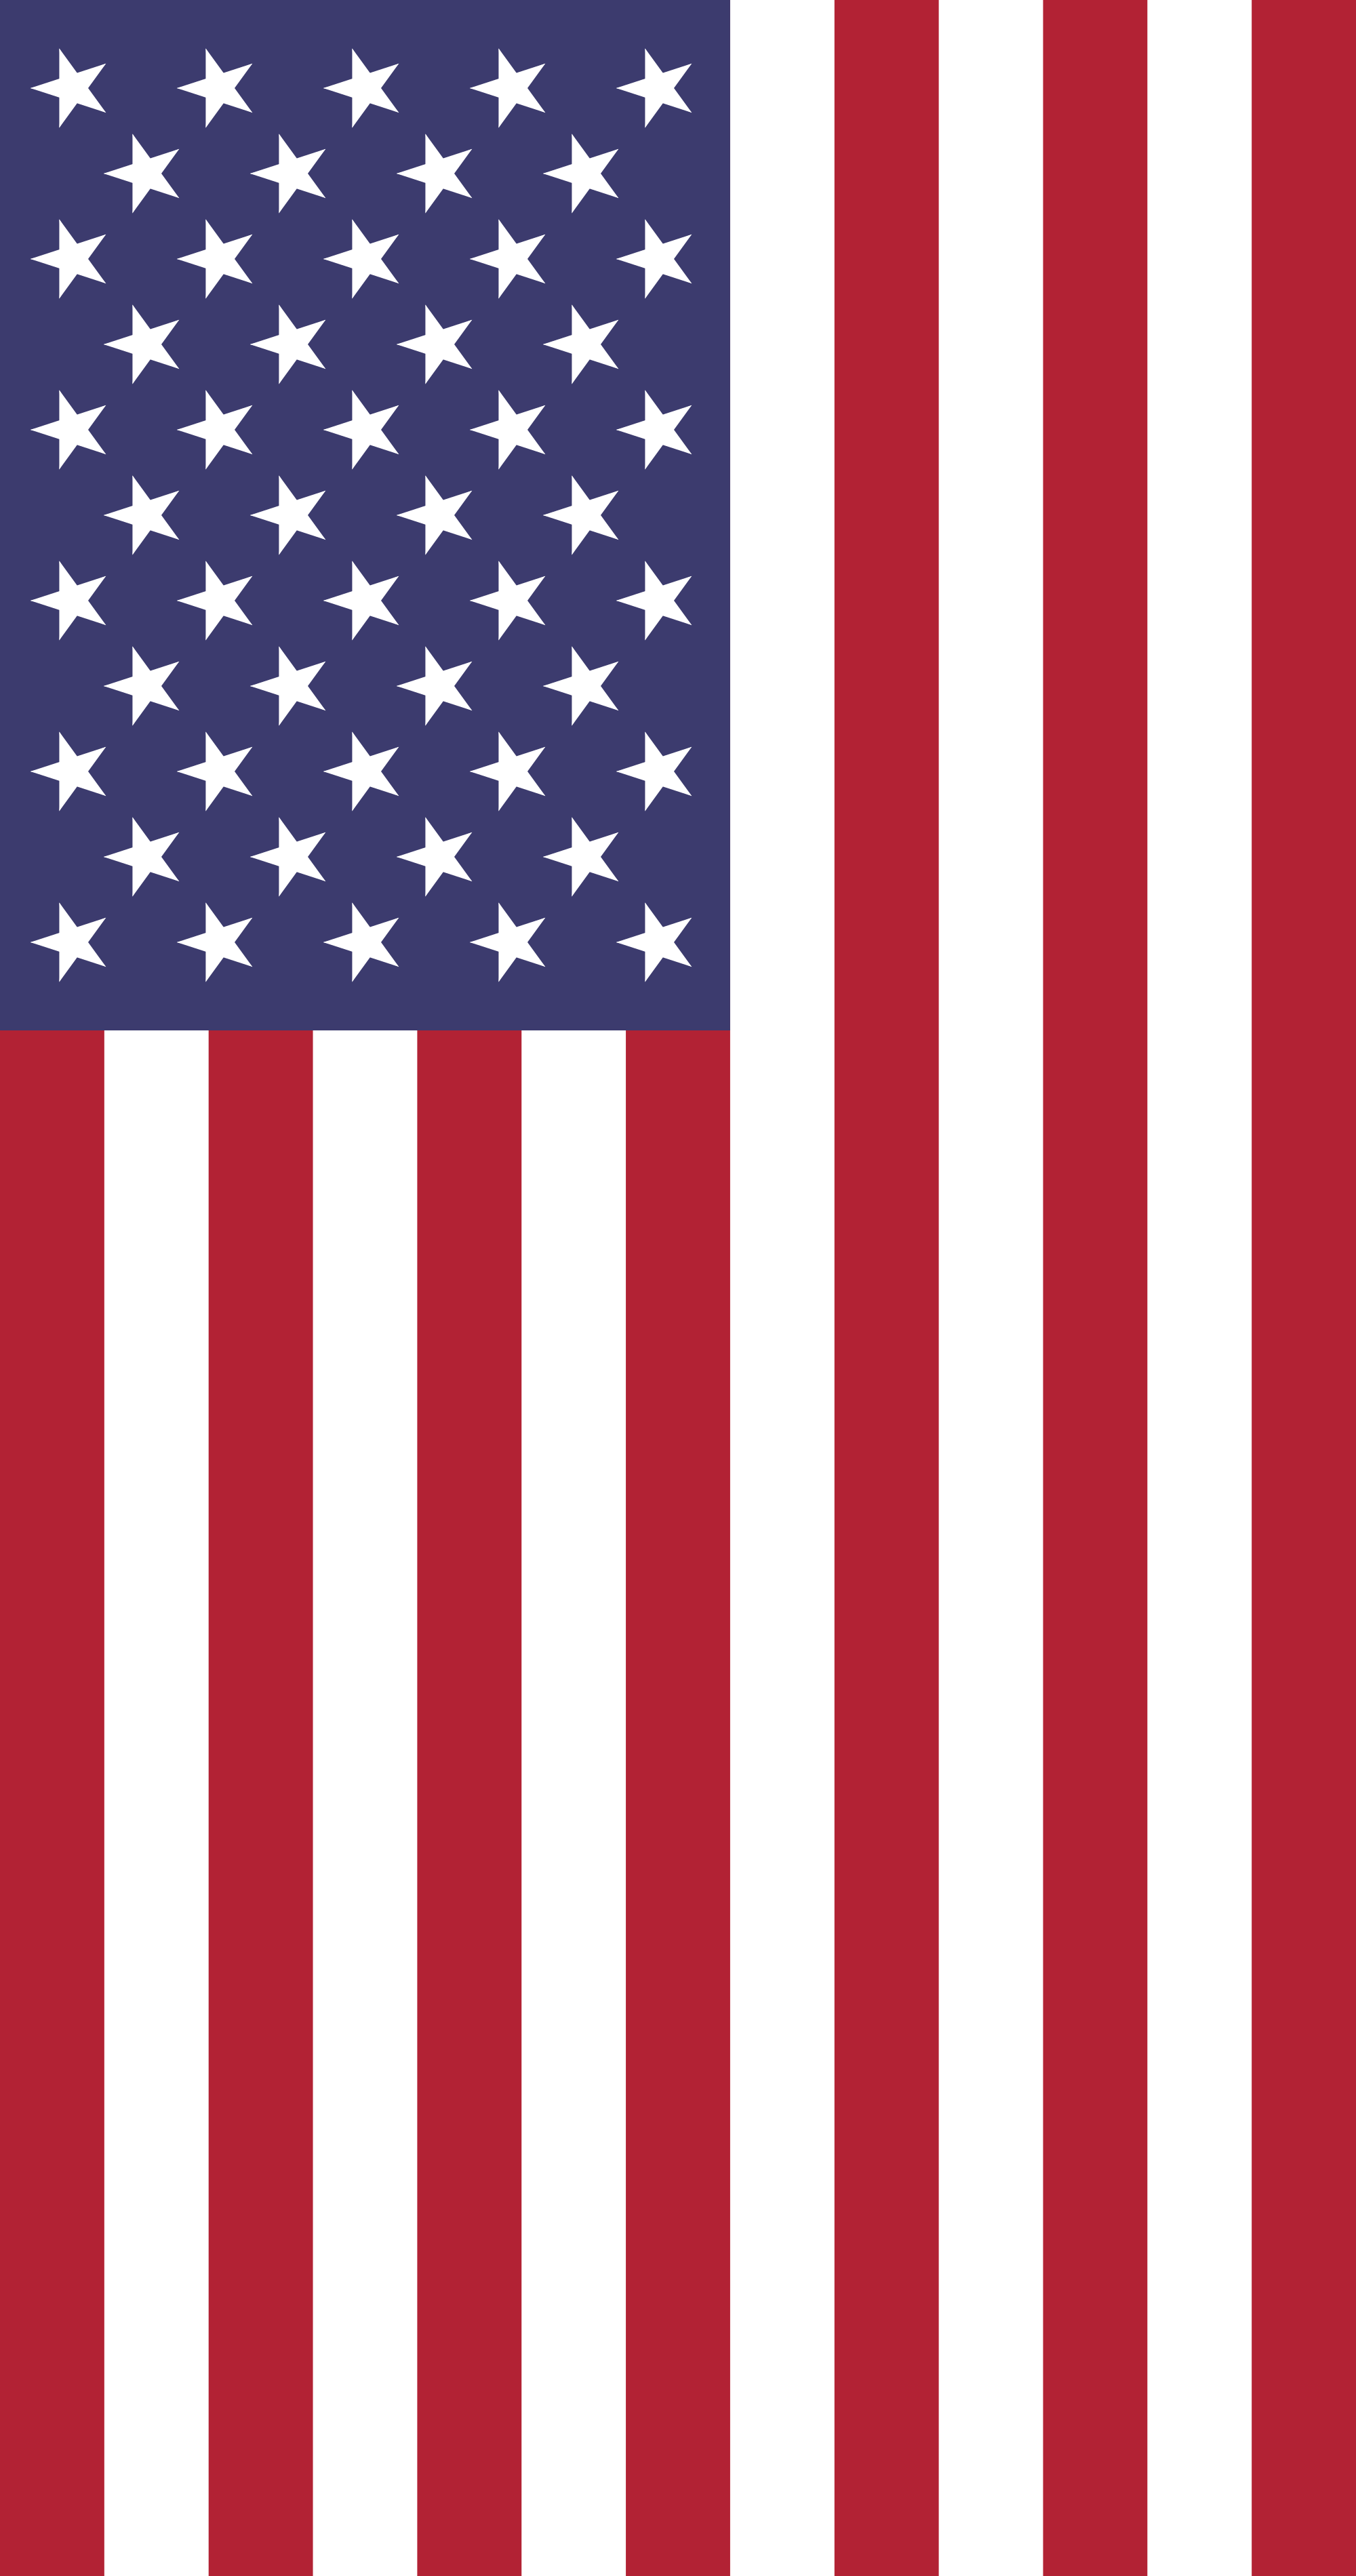 File:Vertical United States Flag.svg - Wikimedia Commons